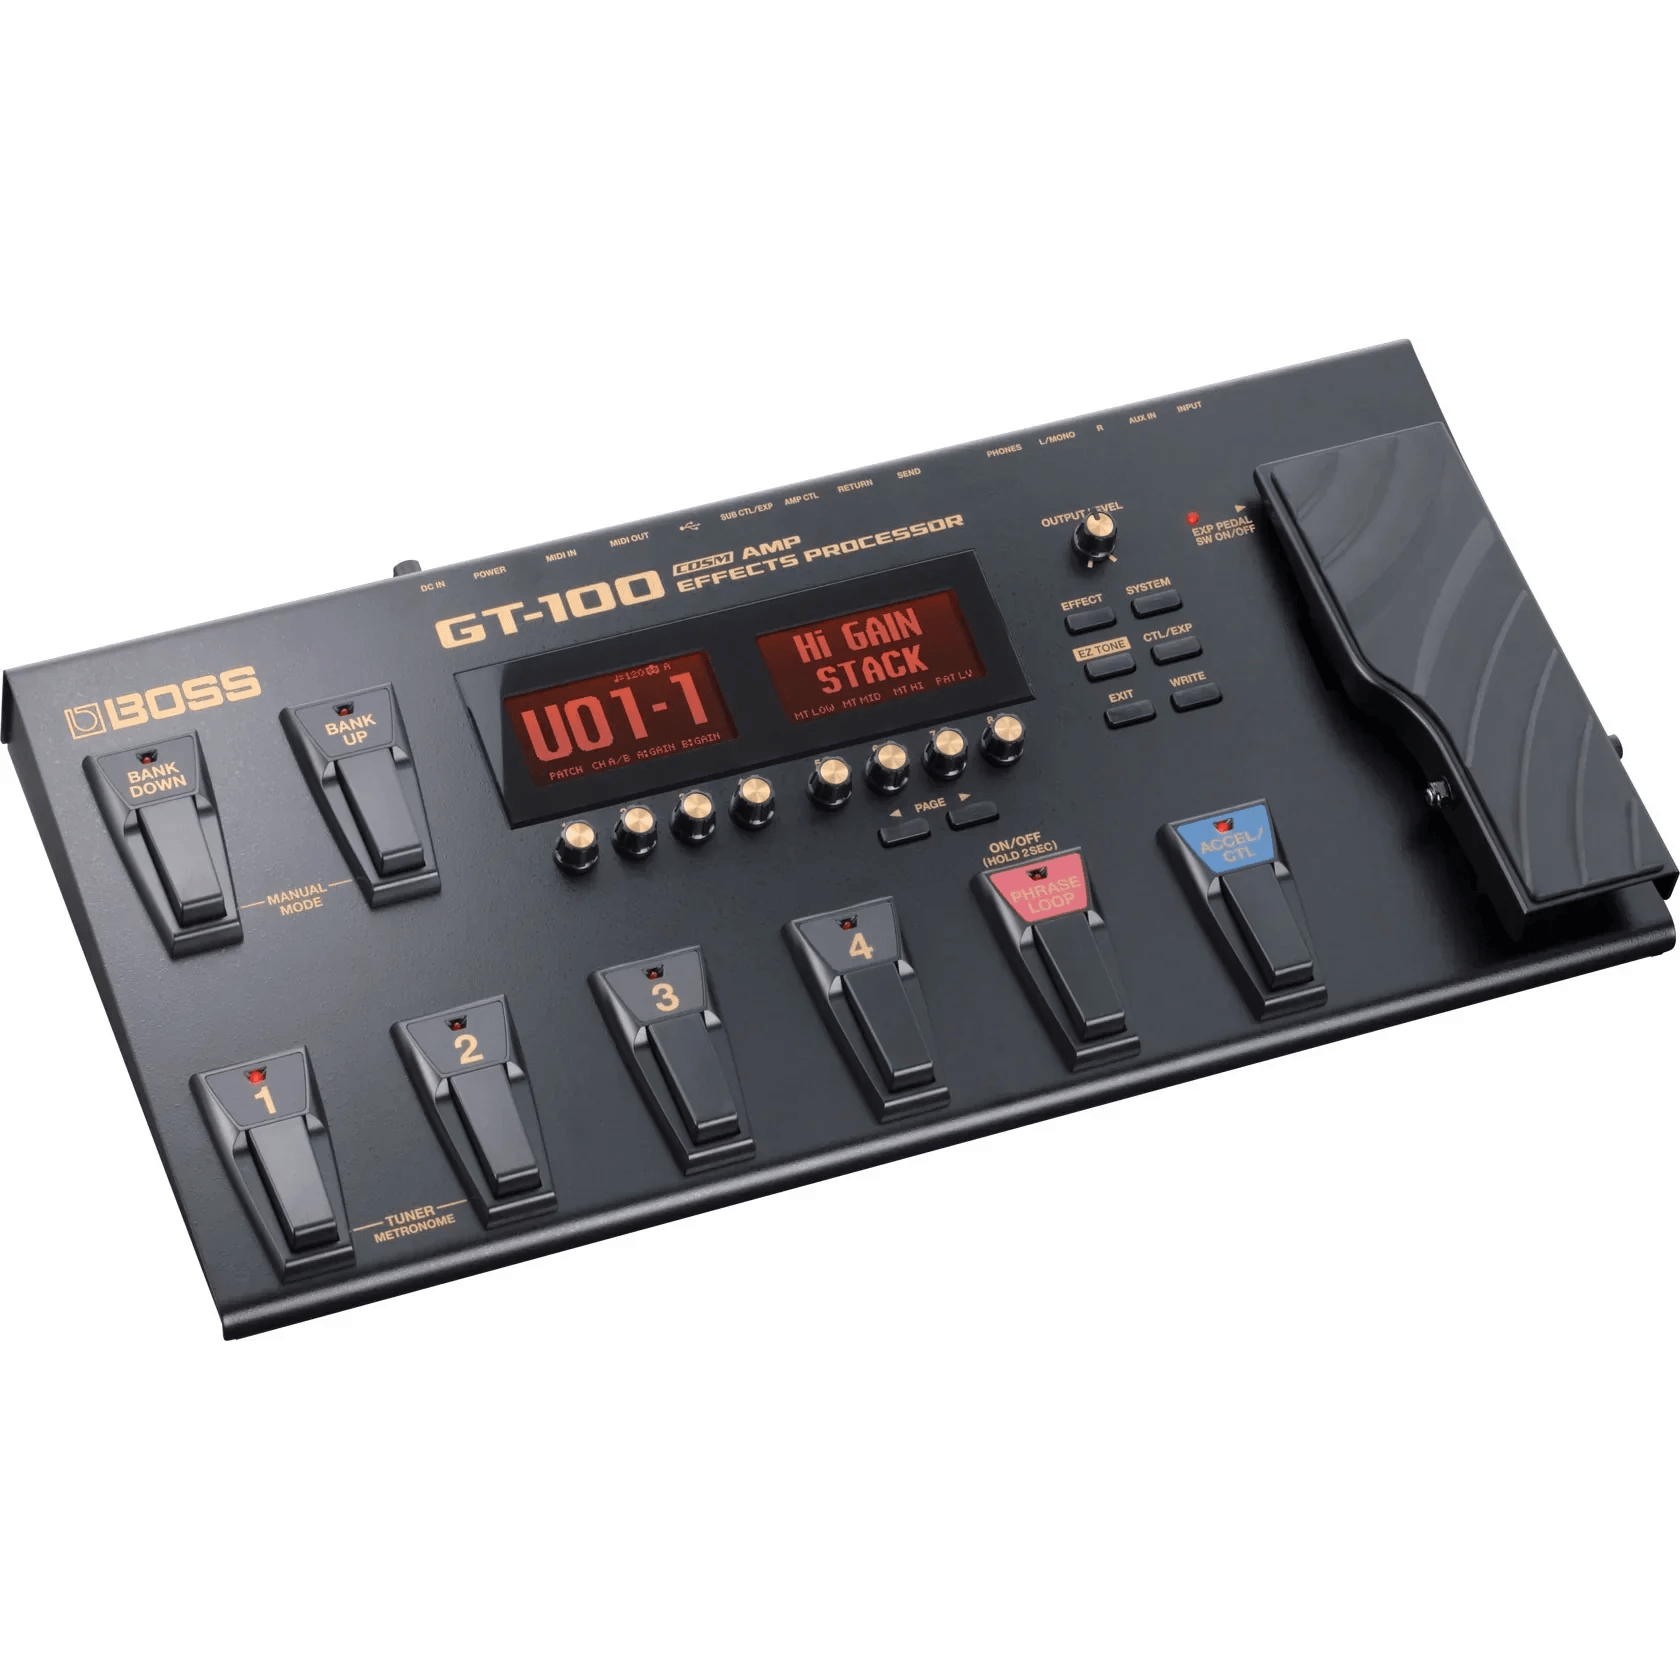 GT-100 Amp Effects Processor - Guitar - Effects Pedals by Boss at Muso's Stuff